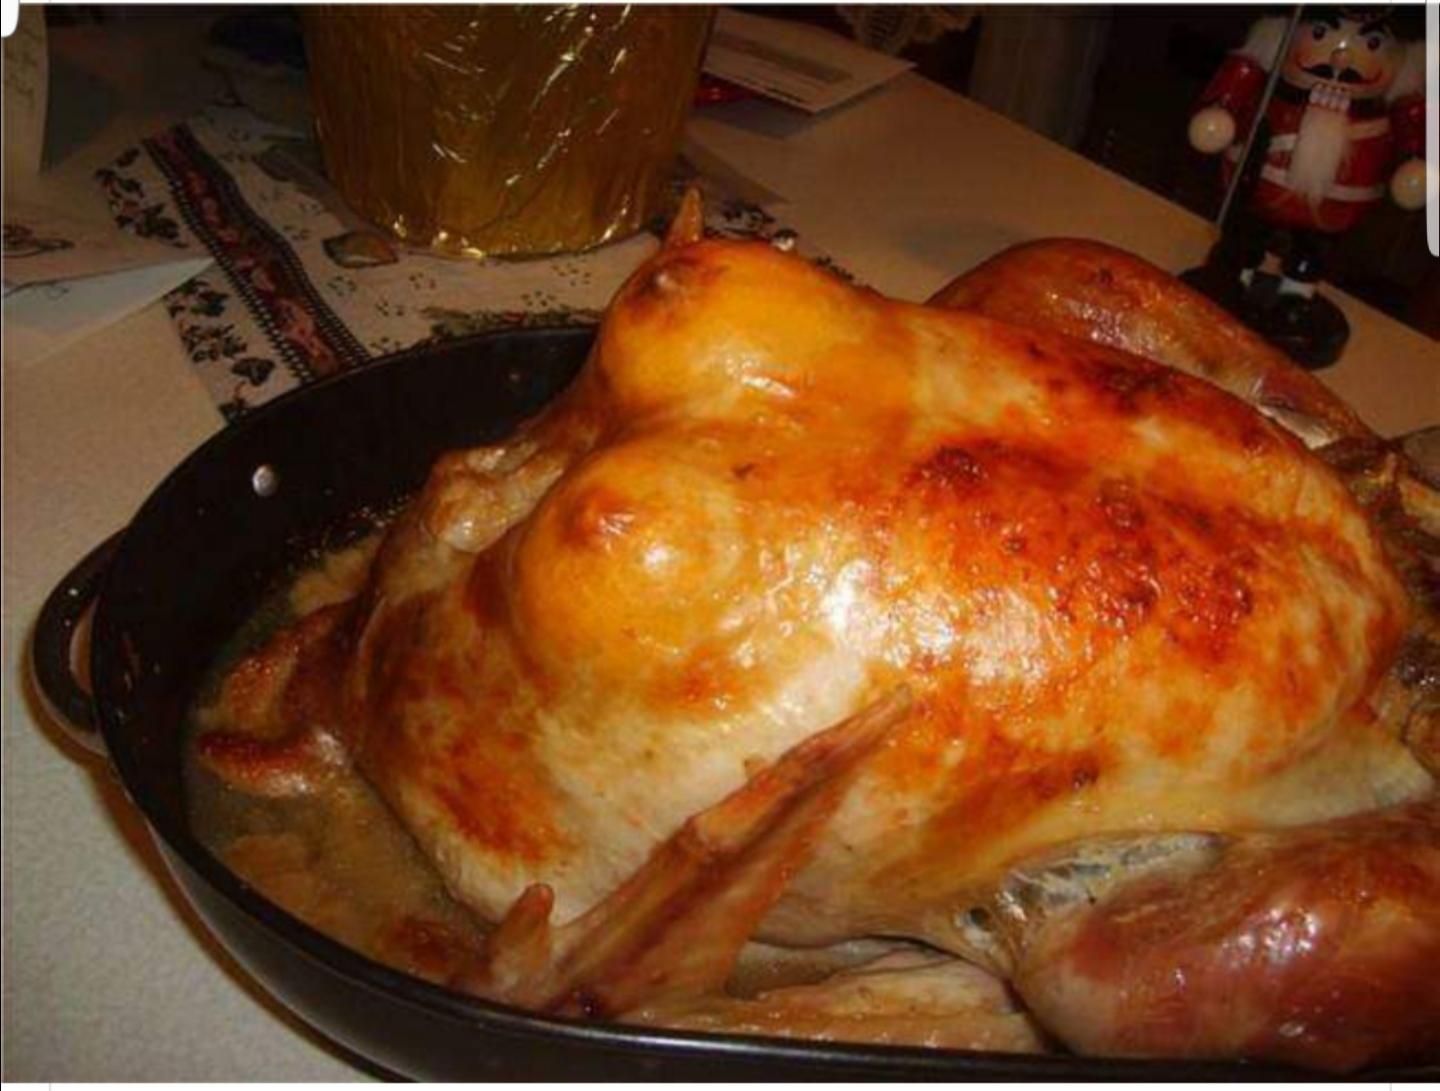 Cut a lemon in half place it under the skin of the turkey to lighten up the holiday.